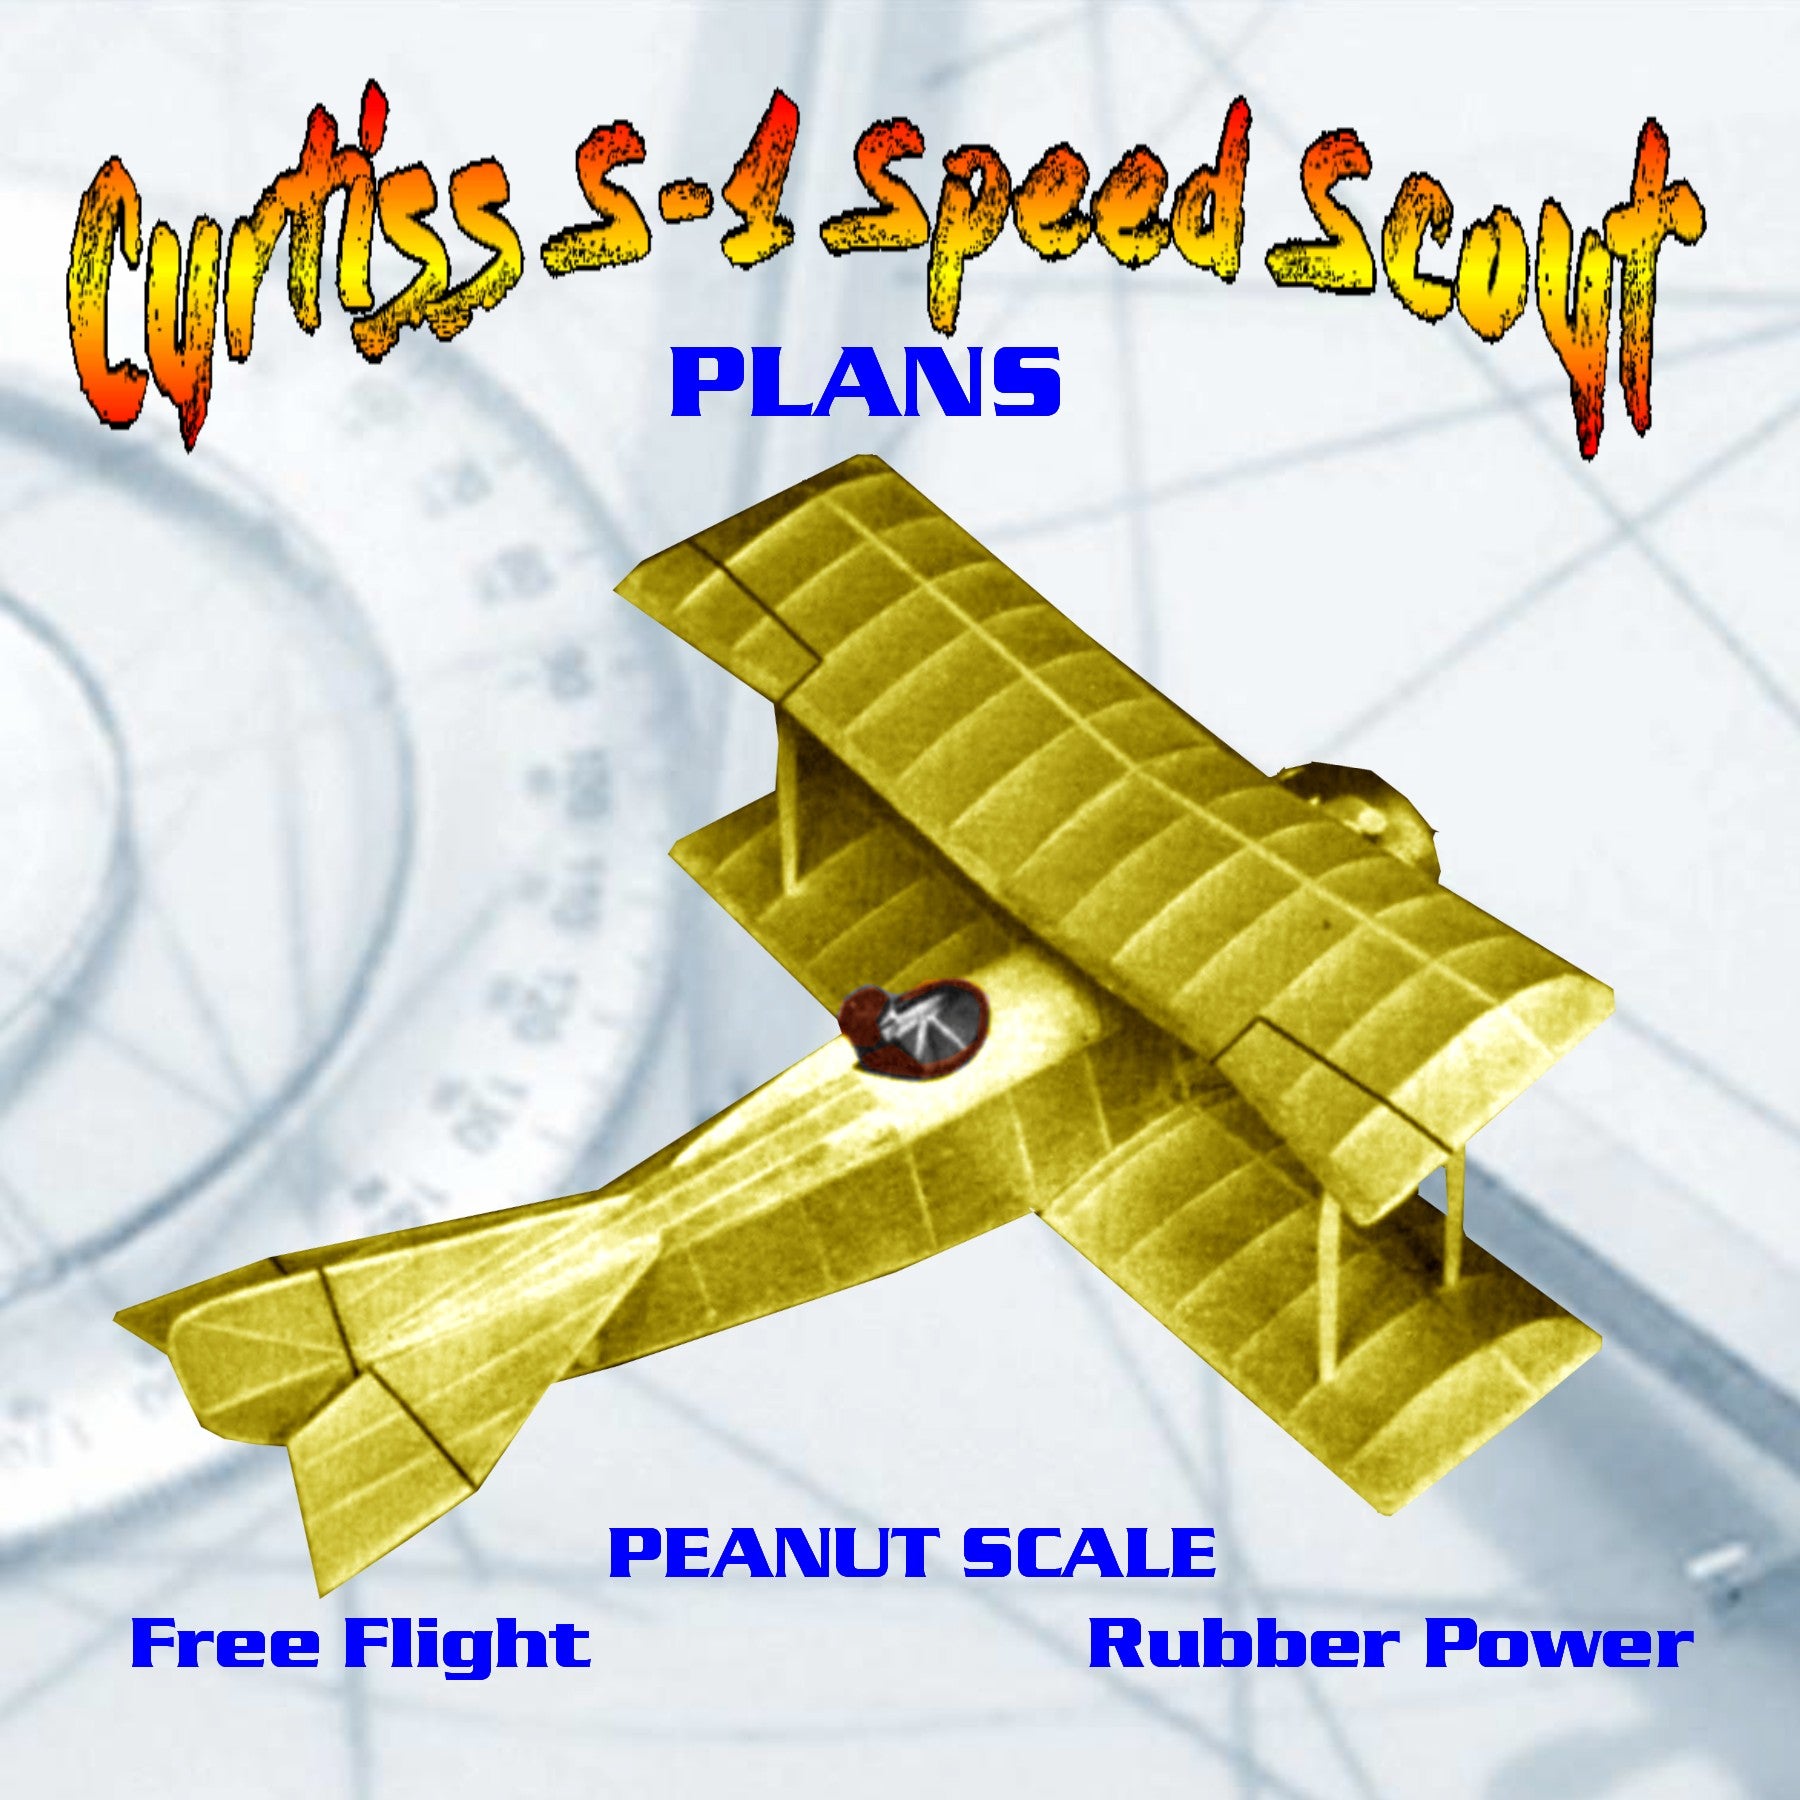 full size printed peanut scale plans curtiss s-1 speed scout first attempt to produce a single-seat fighting scout